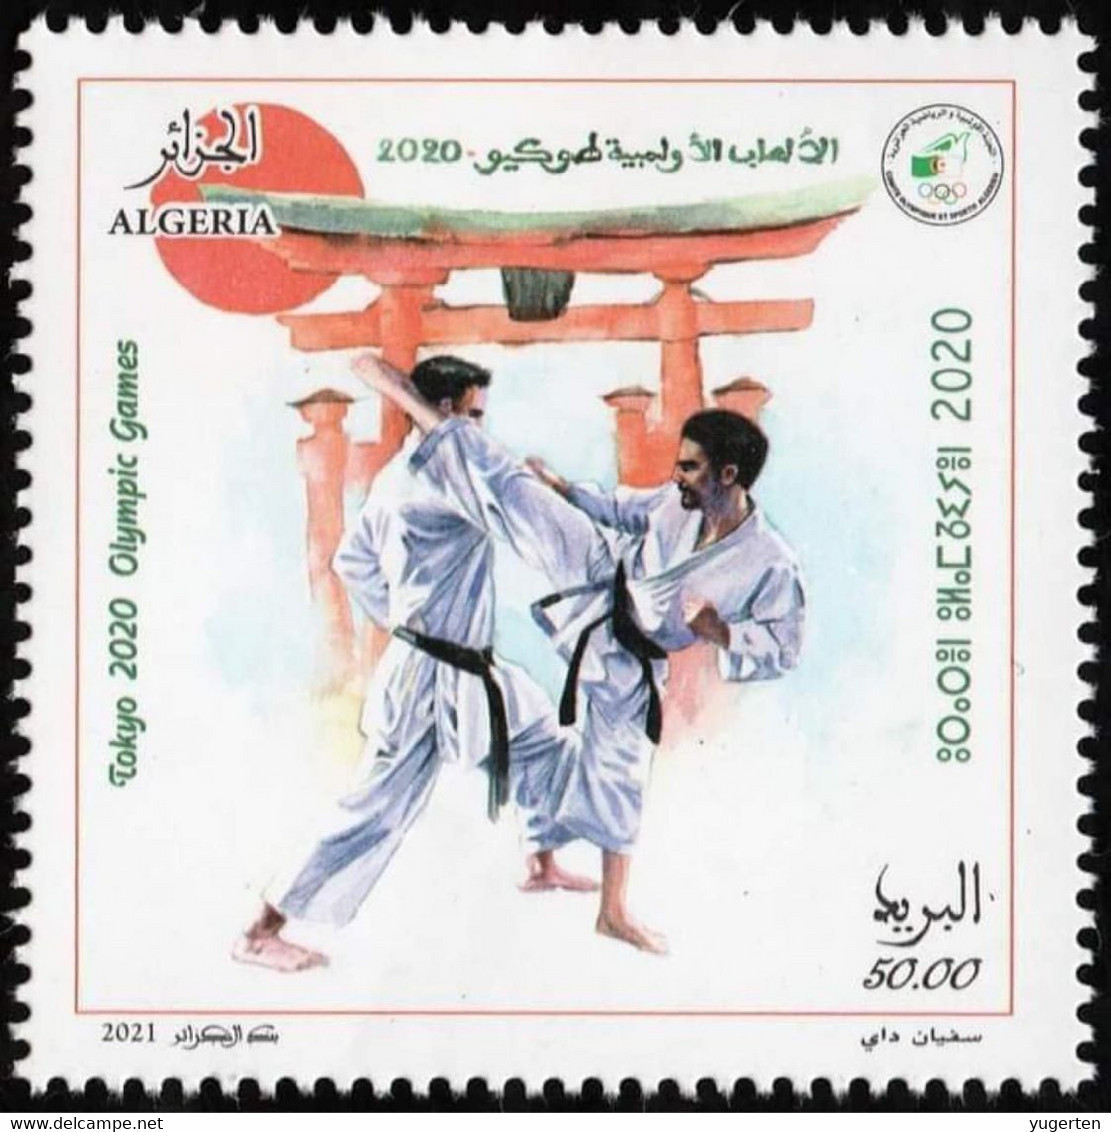 ALGERIA 2021 - 1 V - MNH - Karate - Olympic Games Tokyo JO Olympics Olympische Spiele Jeux Olympiques Japan - Unclassified